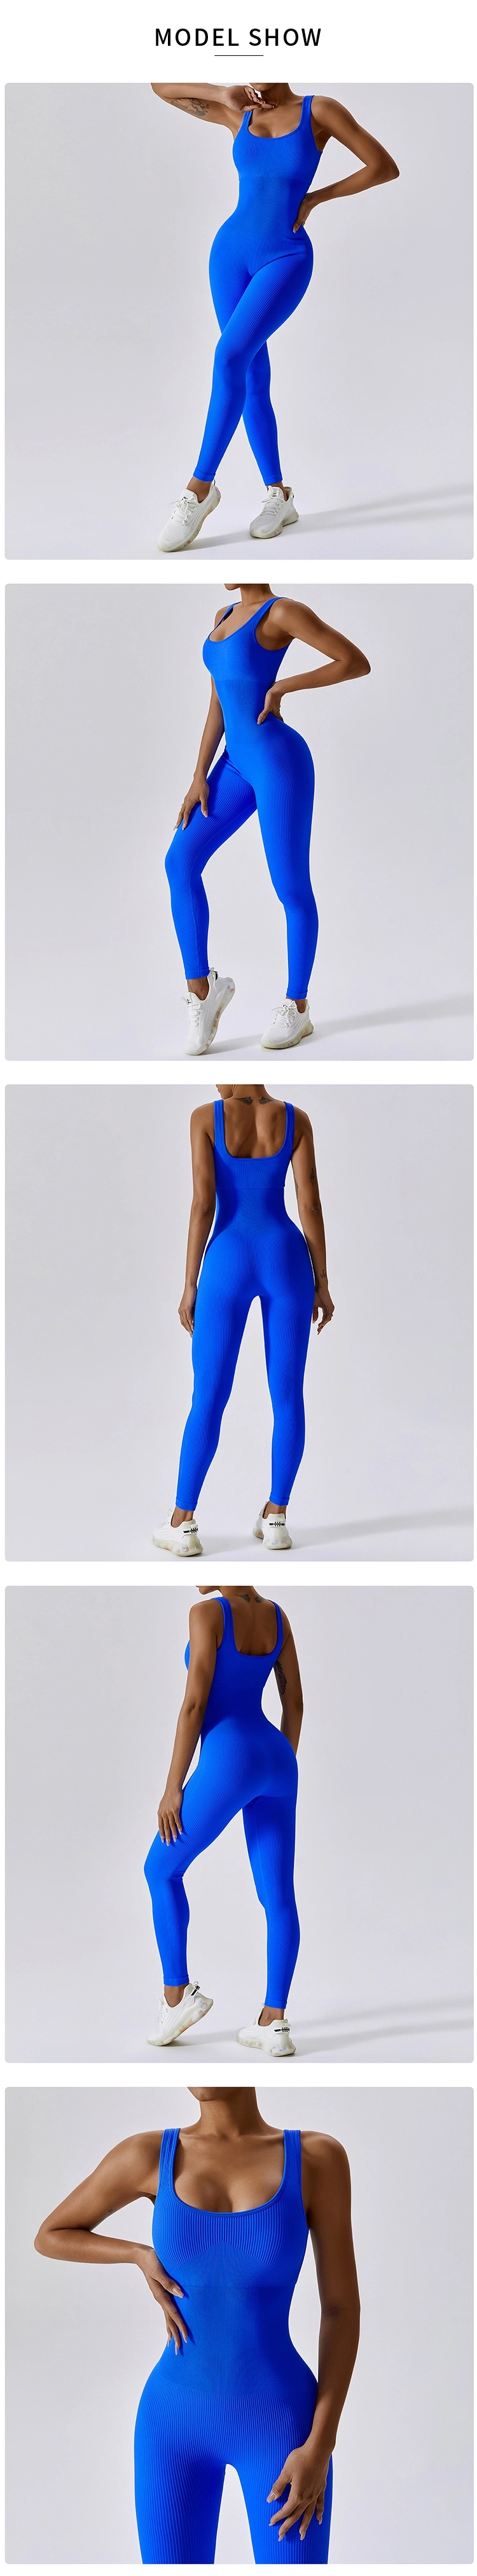 Clt6848 Spring European-American Seamless One-Piece Yoga Suit Dance Tight Fit Exercise Stretch Bodysuit